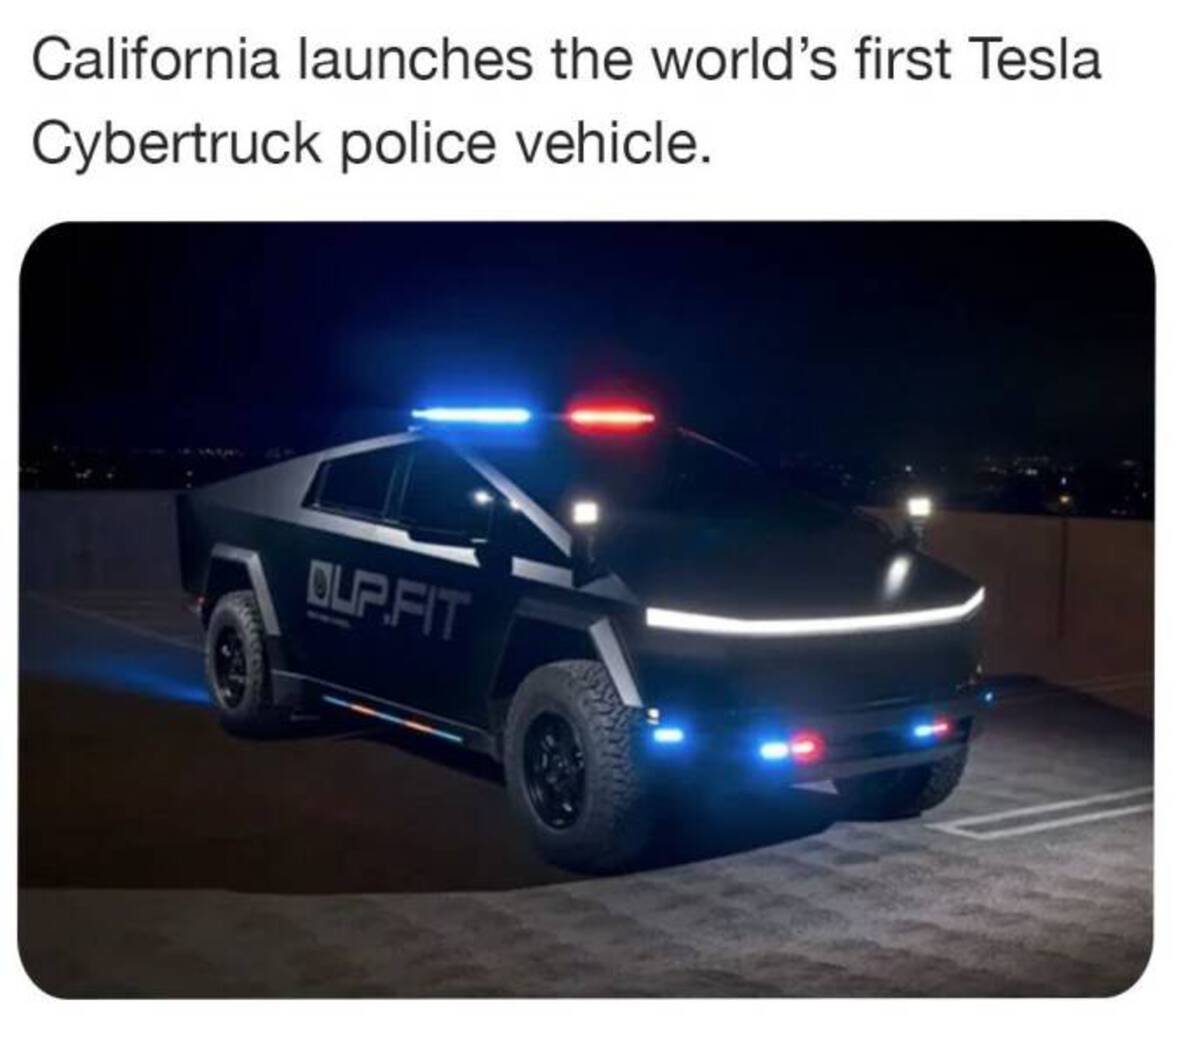 Tesla Cybertruck - California launches the world's first Tesla Cybertruck police vehicle. Oup.Fit